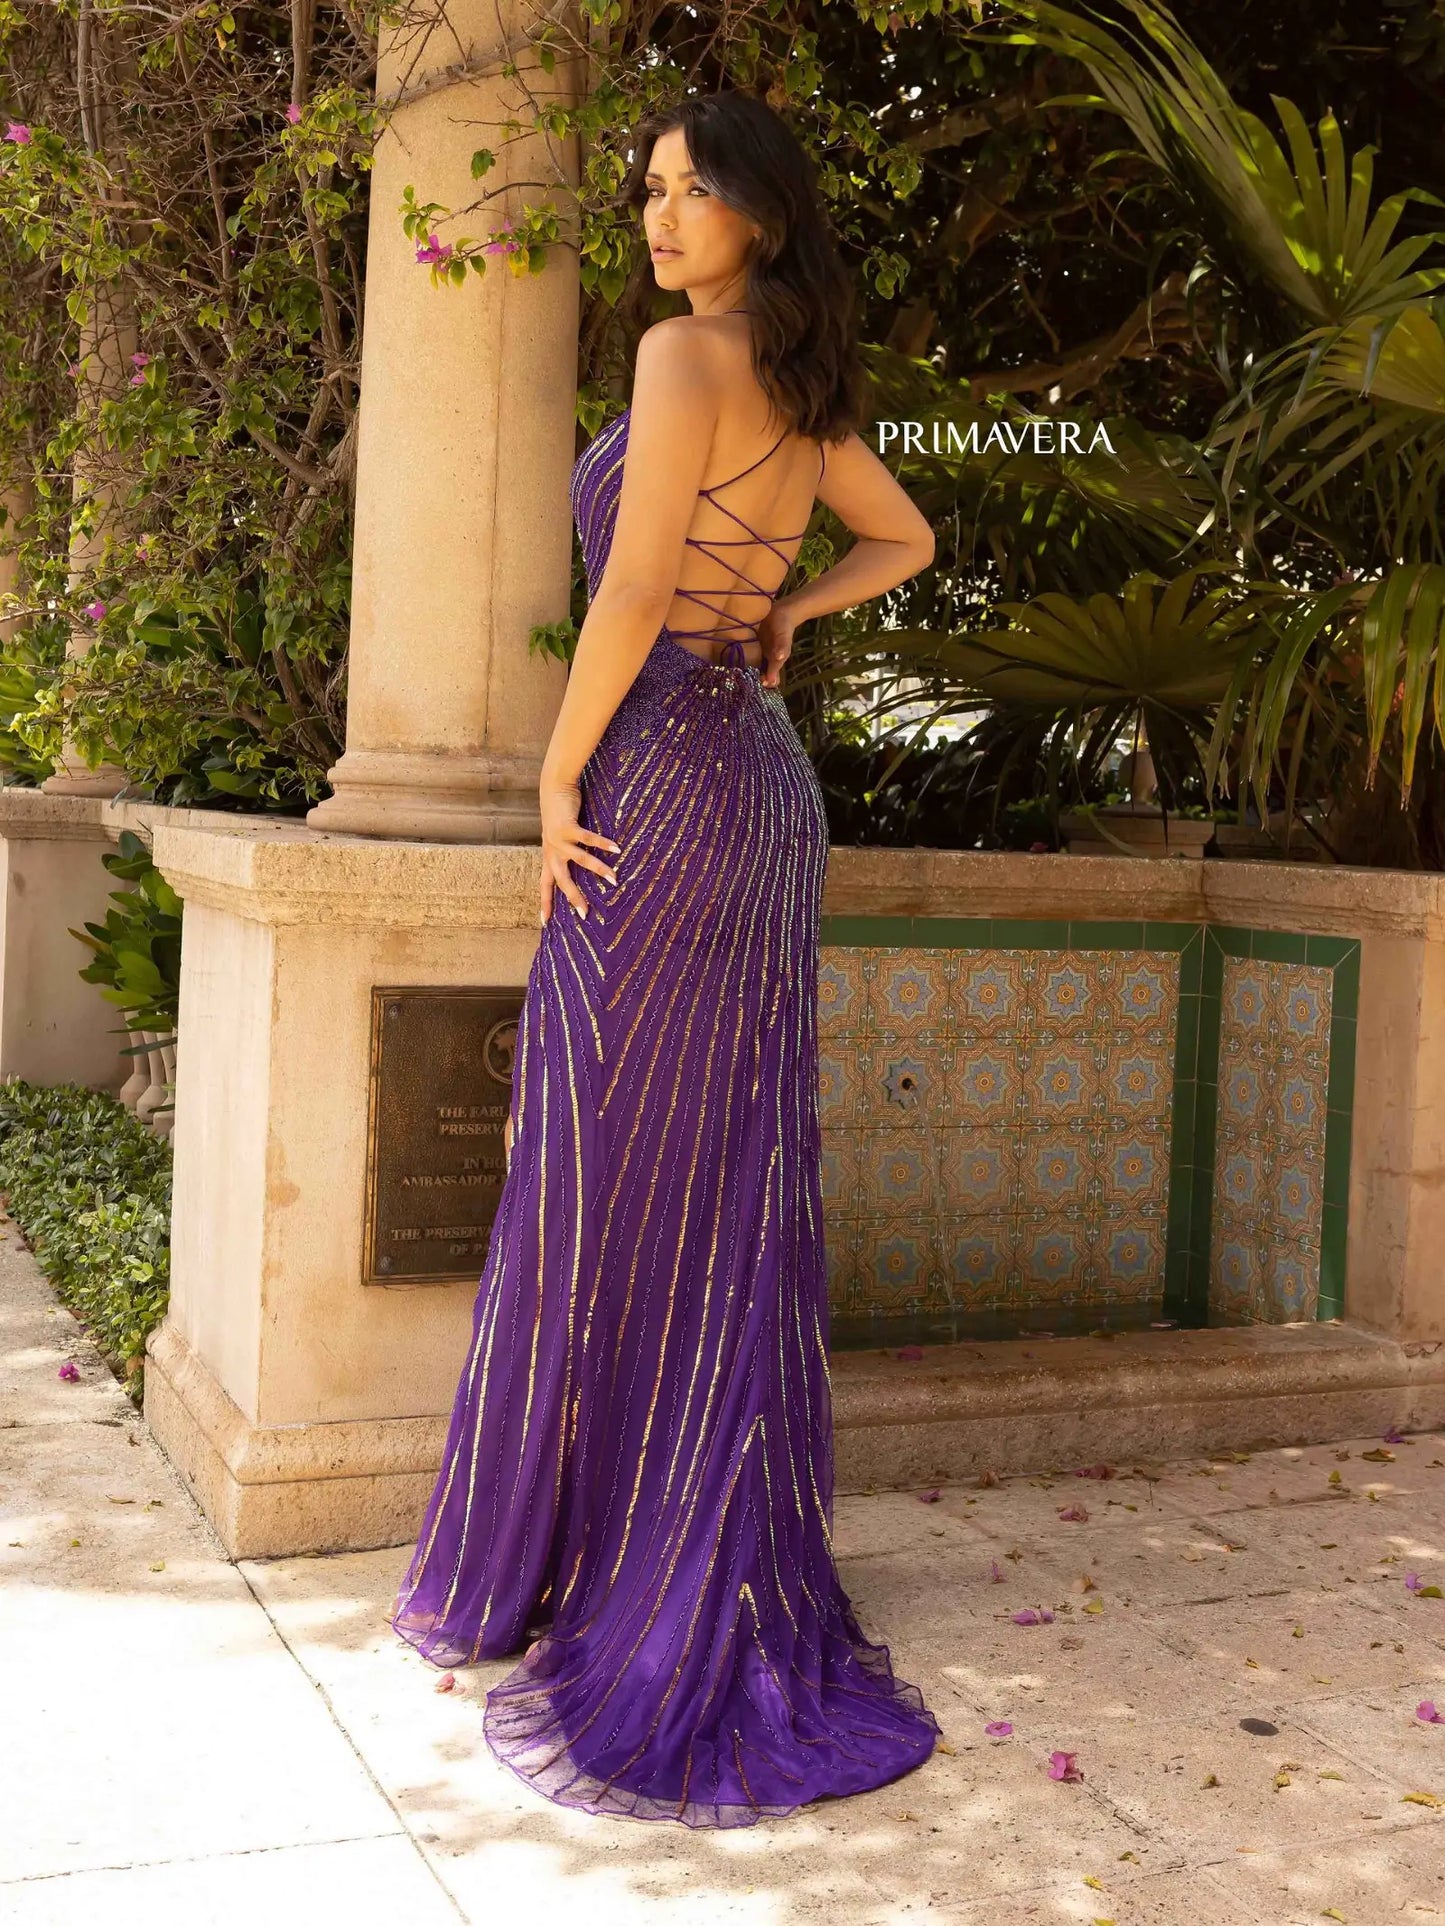 Primavera Couture 3960 Prom Dress Long Beaded dress. This dress has a beautiful design going down the whole dress it also has a slit.   Size-000-18  Colors- Purple, nude